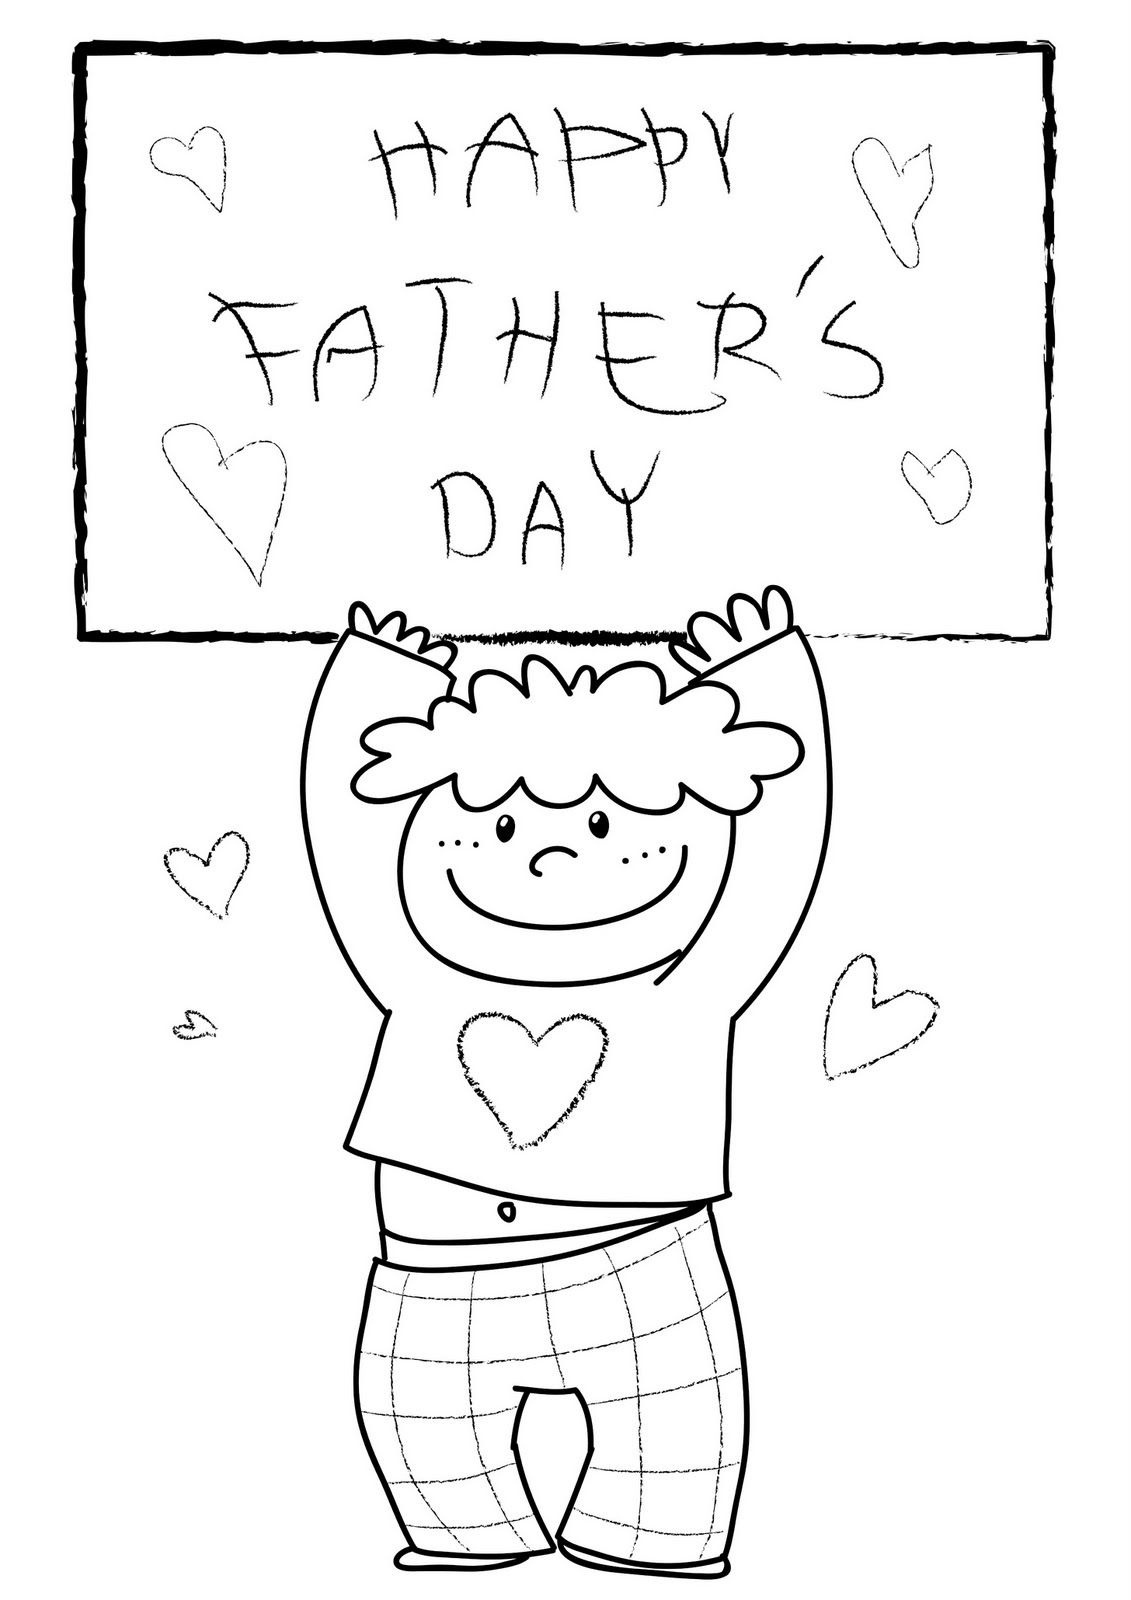 Fathers Day Coloring Page - Check Out Free Printable Happy Fathers - Free Printable Fathers Day Coloring Pages For Grandpa